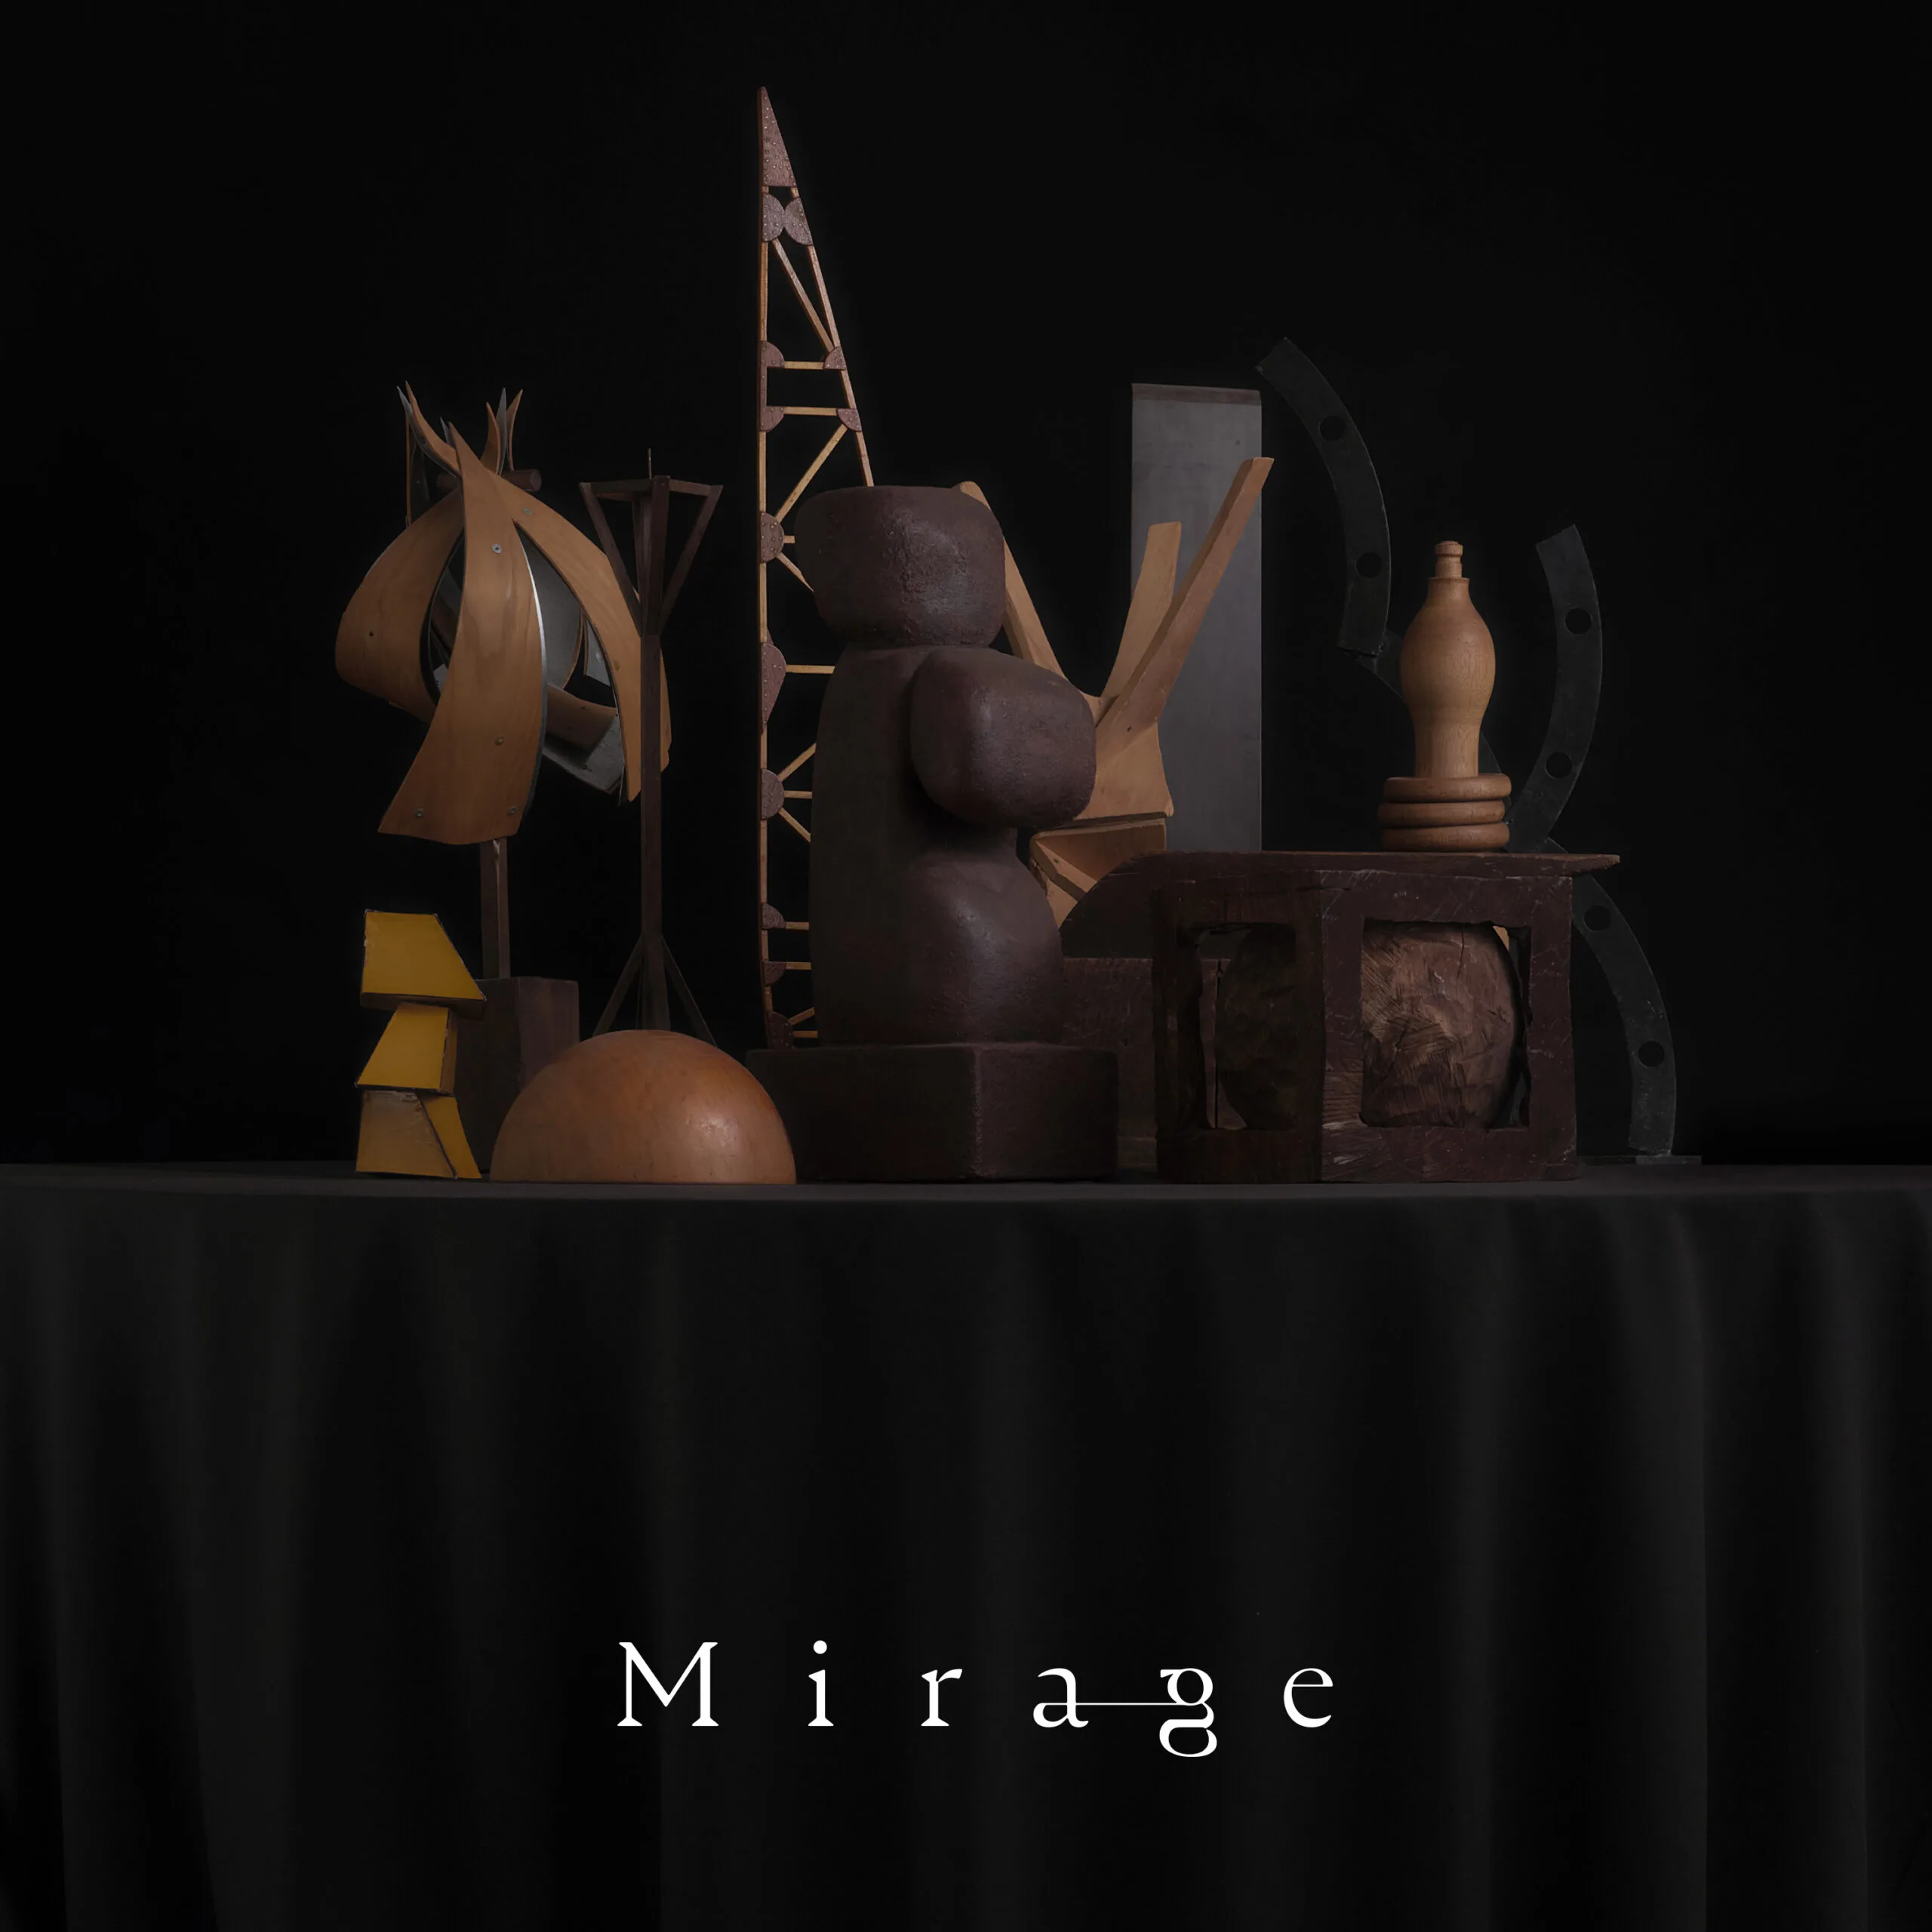 Mirage CollectiveのボーカルはSuchmosのYONCEと判明！